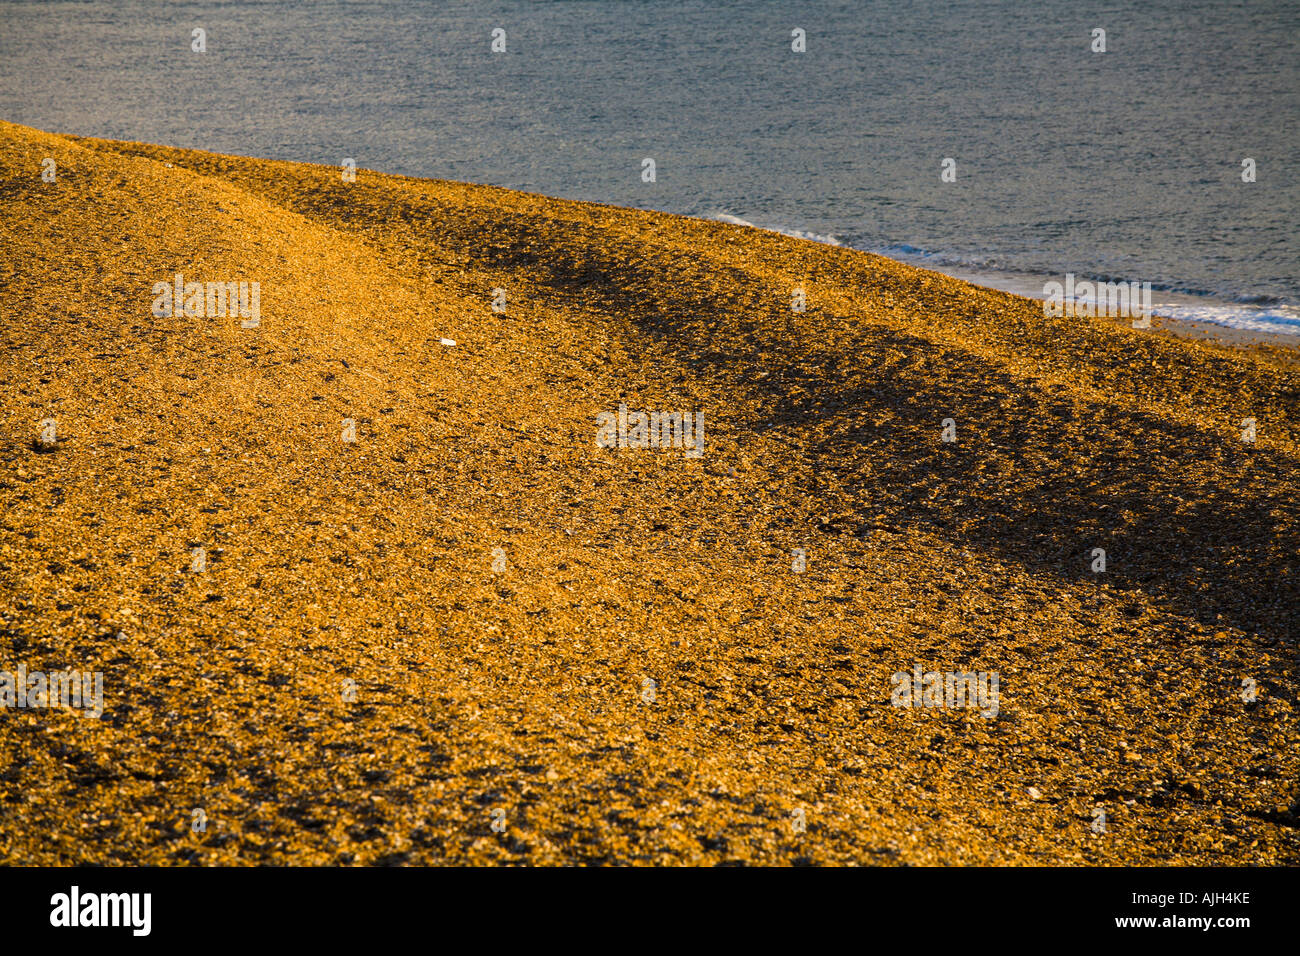 Abstract close view of the shingle beach on hurst spit Hampshire UK Stock Photo